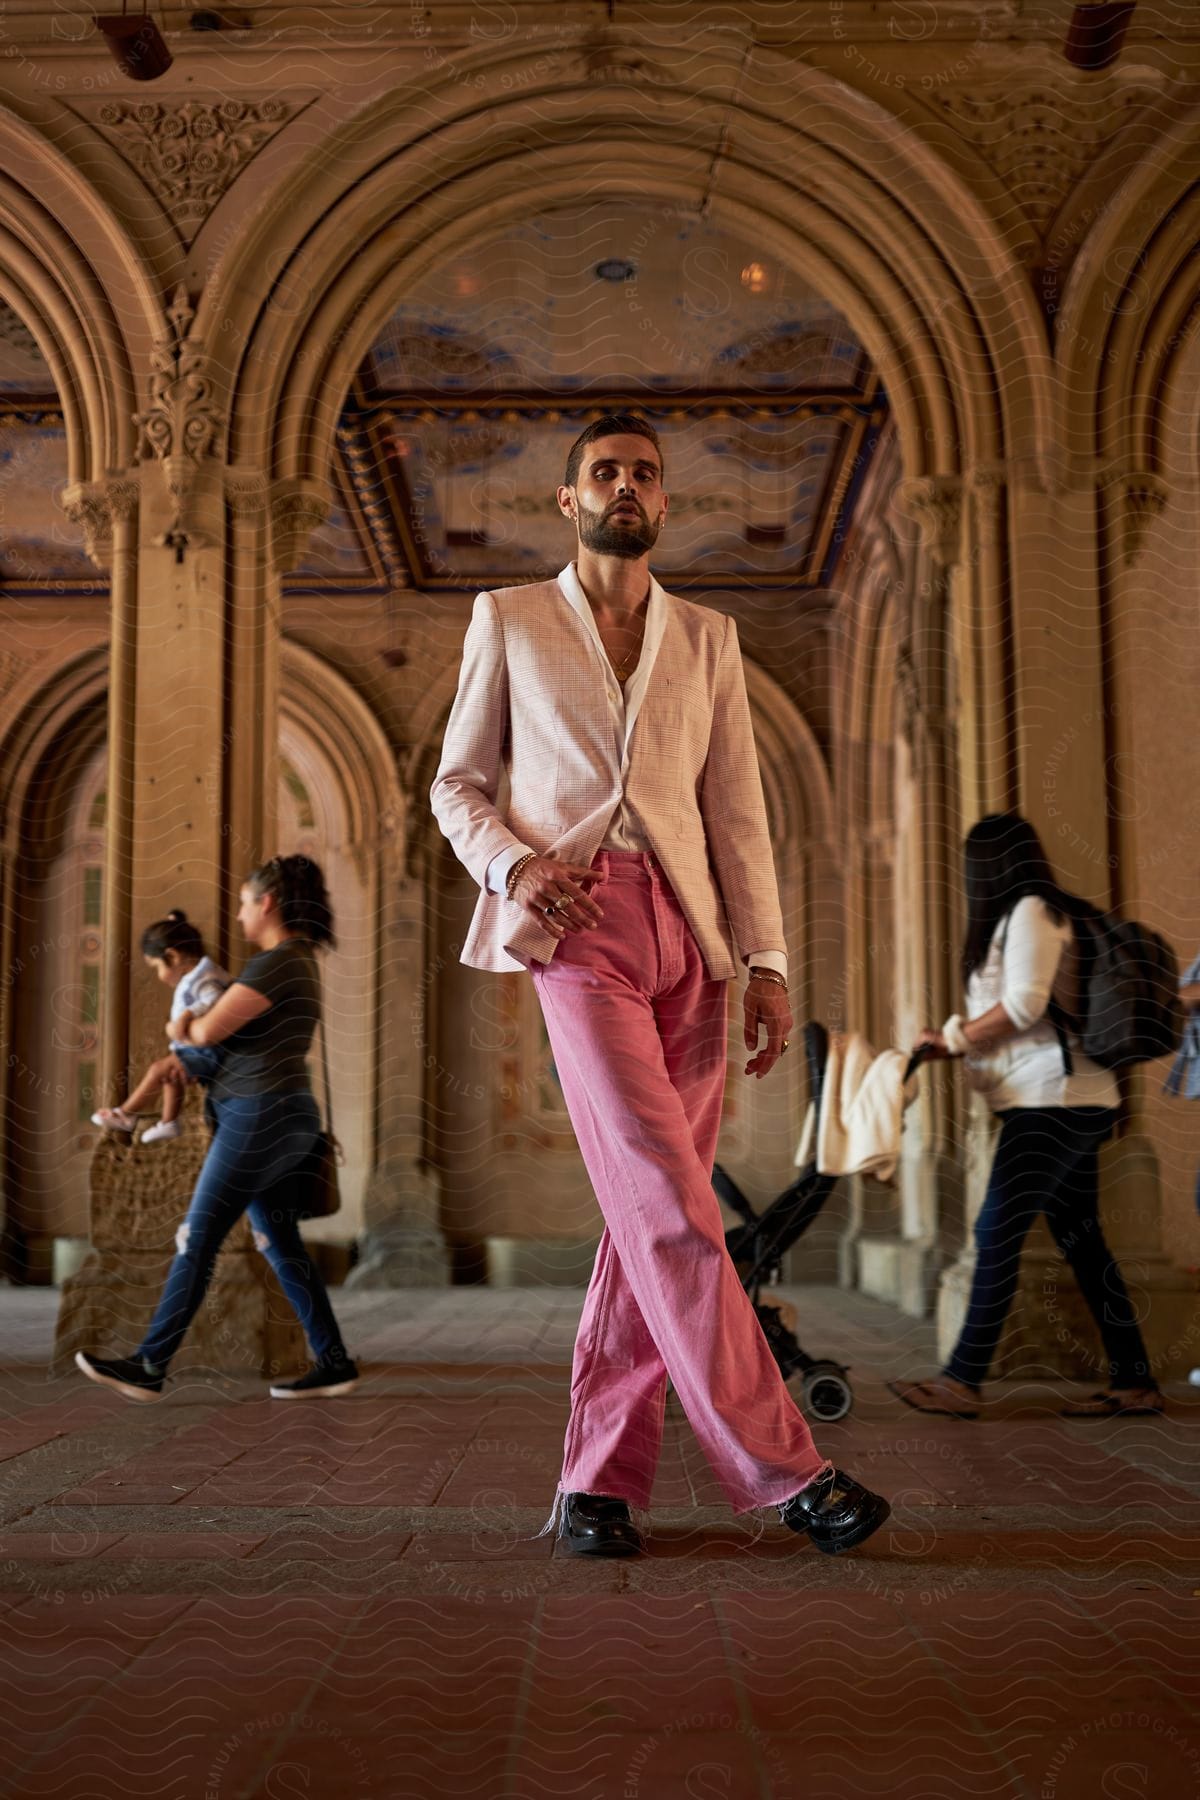 Man posing in beige jacket and pink trousers in an ornate corridor with people in the background.